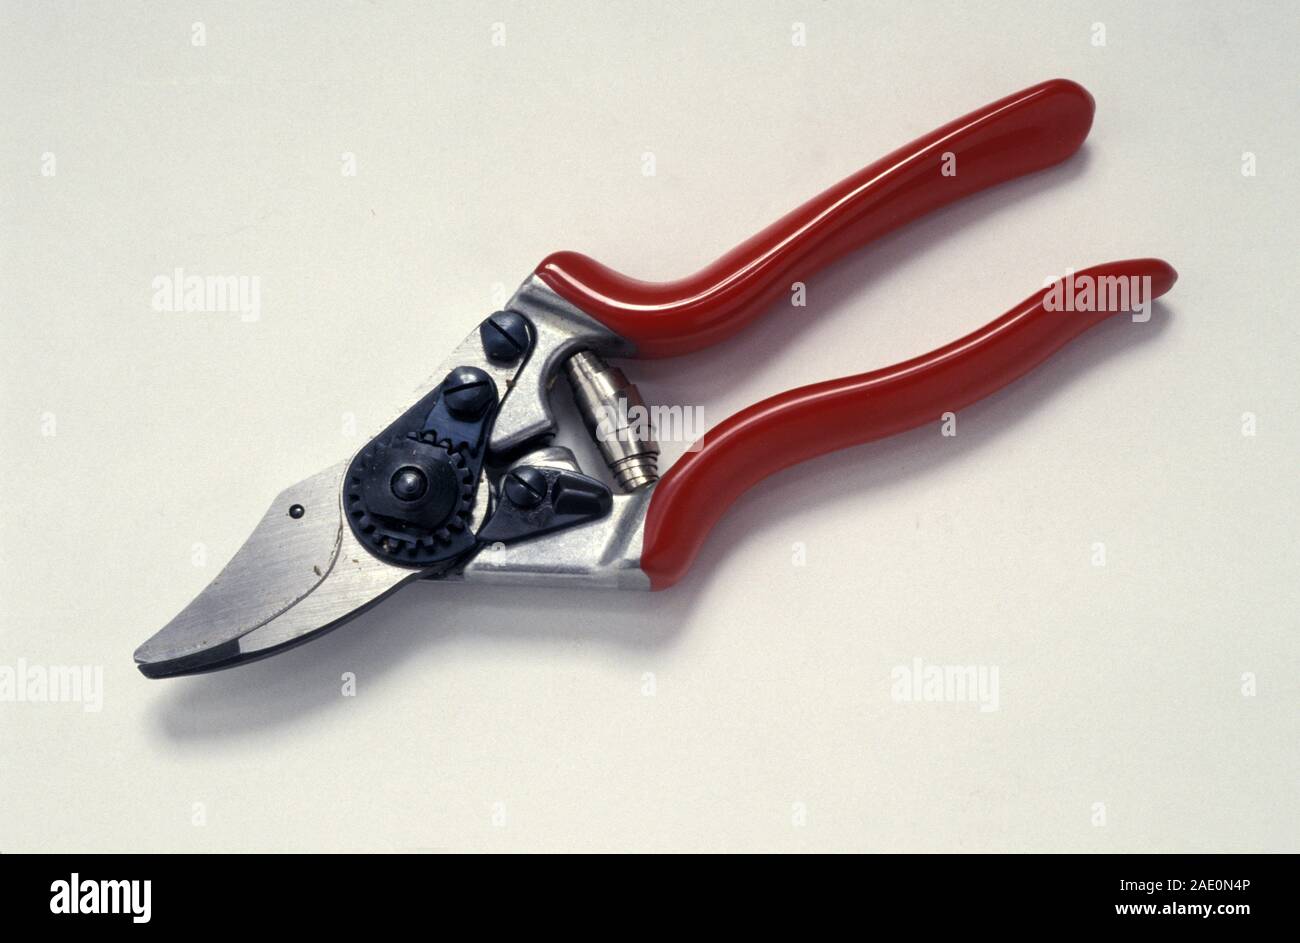 Secateurs, also known as pruning shears or hand pruners. Stock Photo